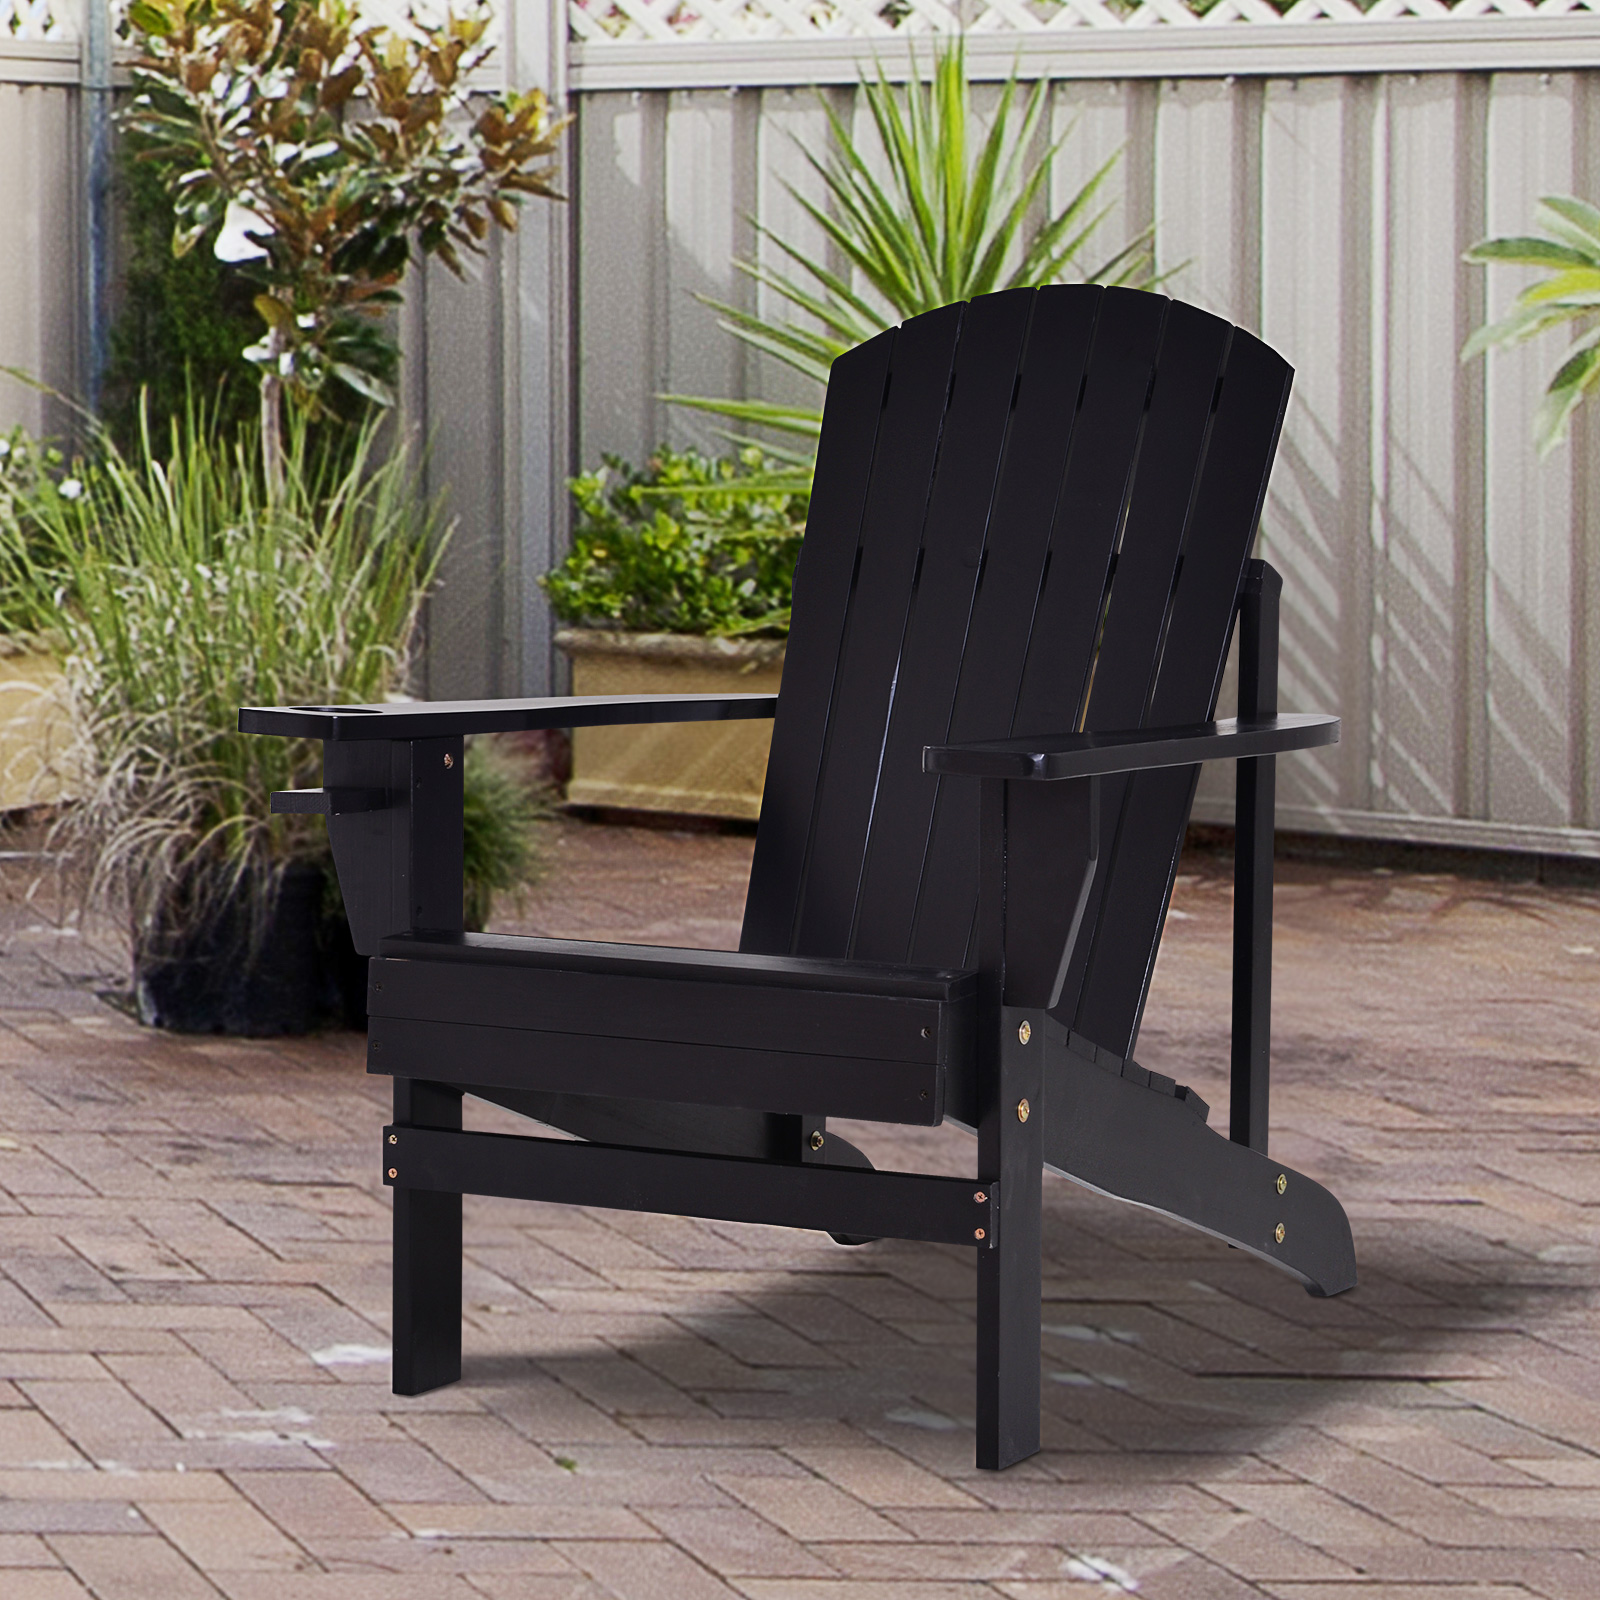 Outsunny Wood Adirondack Chair, Wooden Outdoor & Patio Seating, Black - image 2 of 9